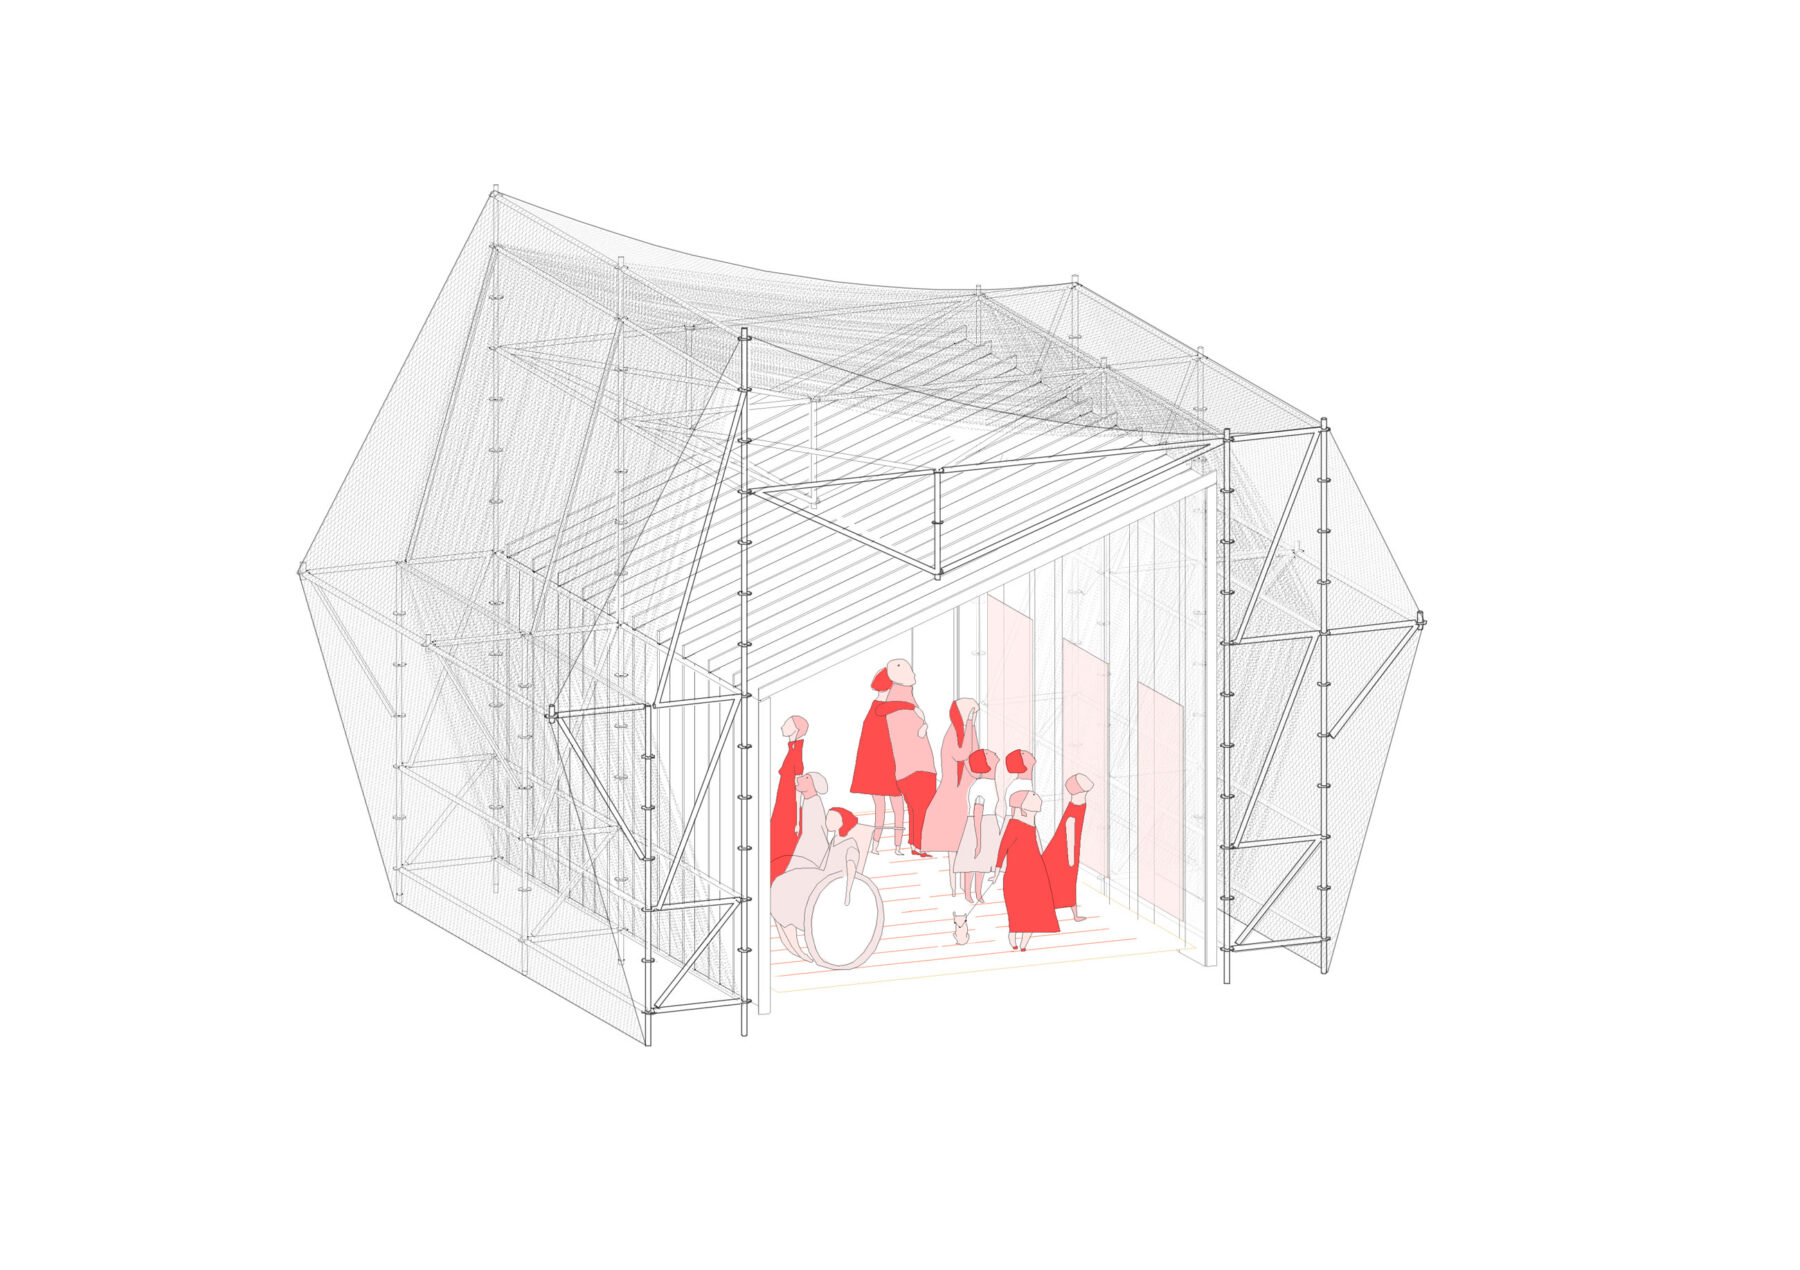 Archisearch ΕΣΩ 2022 _ Meet the Speakers | Information point in Glorias square, Barcelona, Spain by Peris+Toral Arquitectes